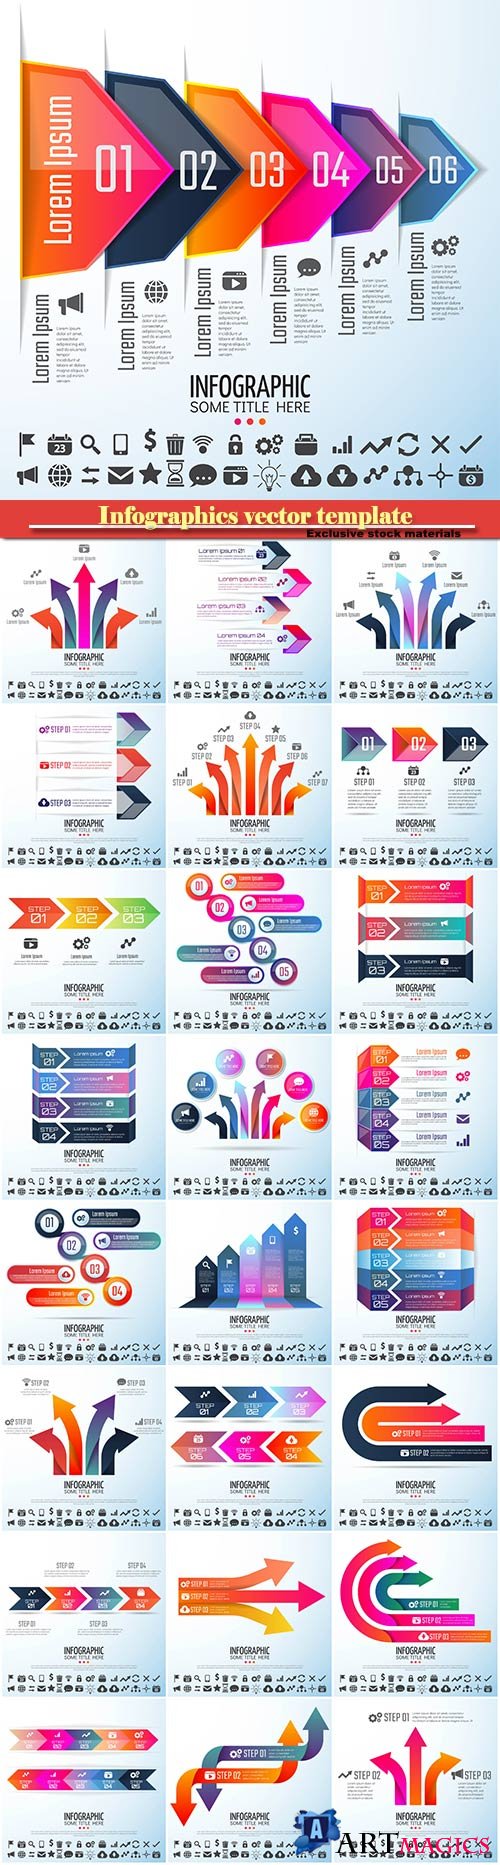 Infographics vector template for business presentations or information banner # 8